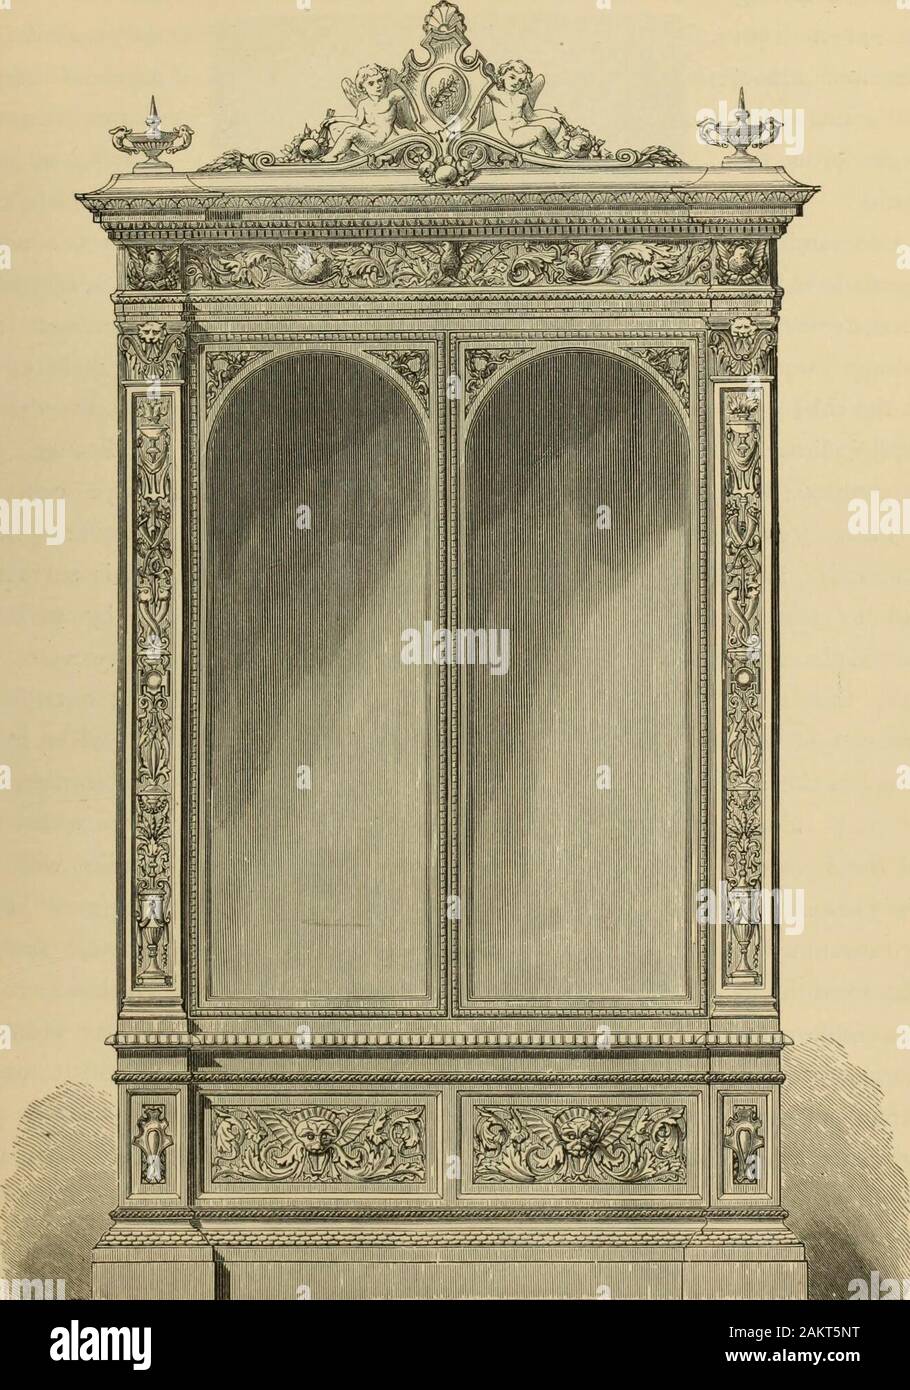 Examples of household taste . The Seasons Plaque: Elkington &lt;&» Co., London. minute attention to detail led the workmen to neglect the necessity of con-sulting the effect of the whole, which is vigorous and bold, as well as har-monious and well balanced. In the panel on the side of the vase is a littlepicture in relief, just a bit of nature such as might be studied from a window—a tree-trunk and branch, two or three birds disporting themselves, some flowersand grasses, yet all instinct with life and movement, and in keeping with therest of the design. It is such work as this that wins for t Stock Photo